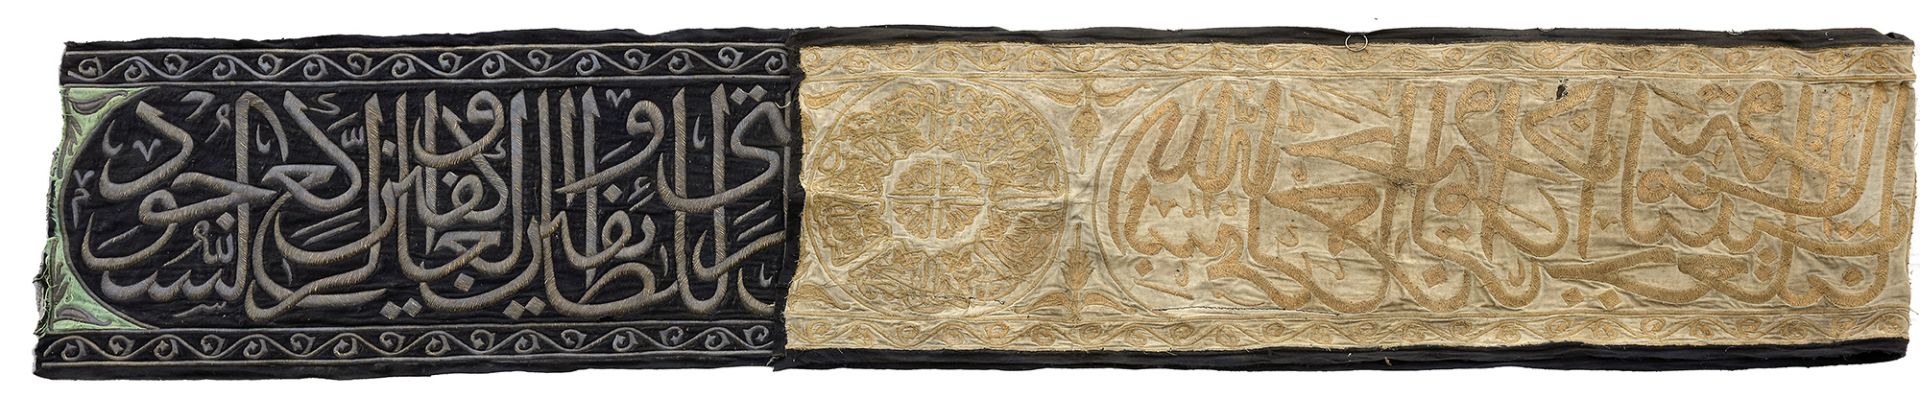 AN OTTOMAN METAL THREAD-EMBROIDERED HIZAM, EARLY 20TH CENTURY - Image 2 of 3